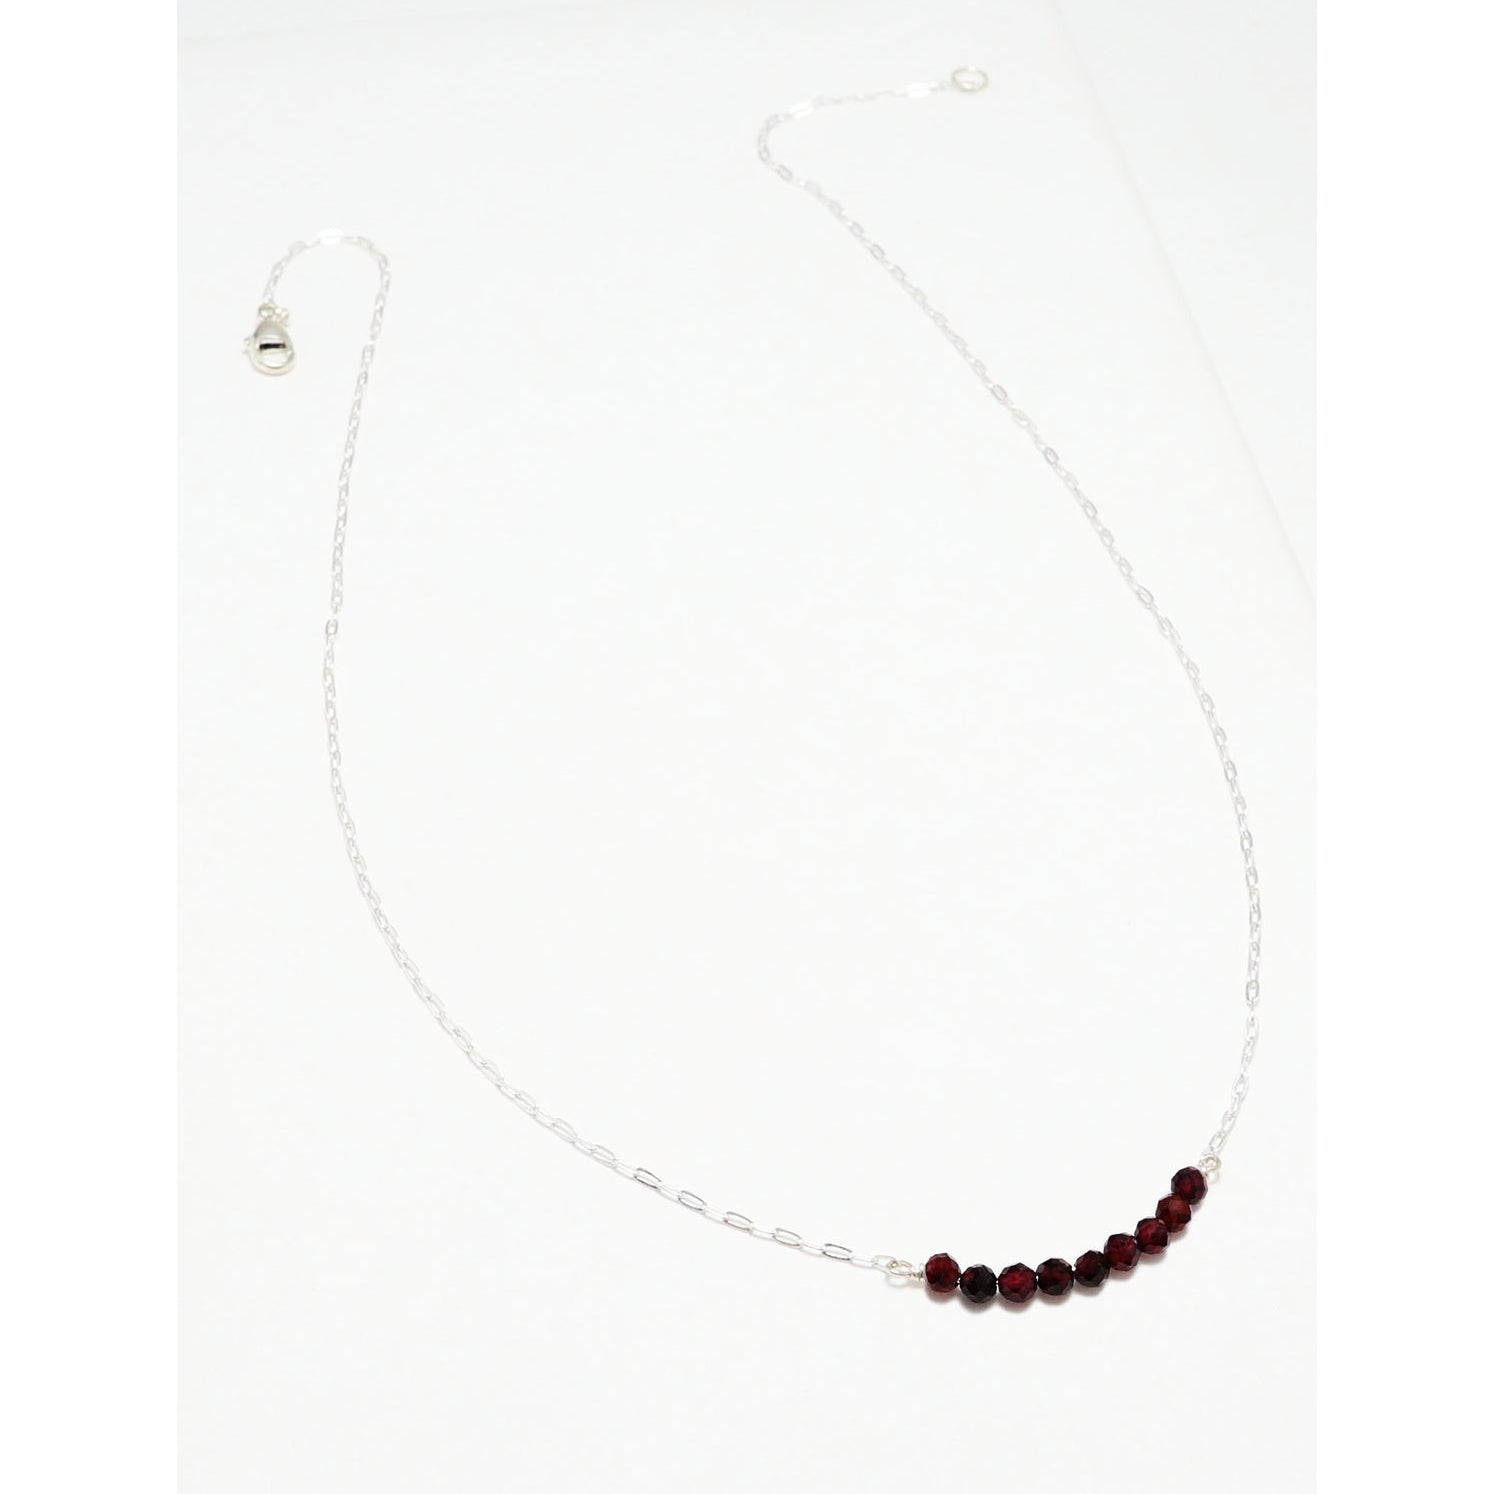 The January Necklace No. II